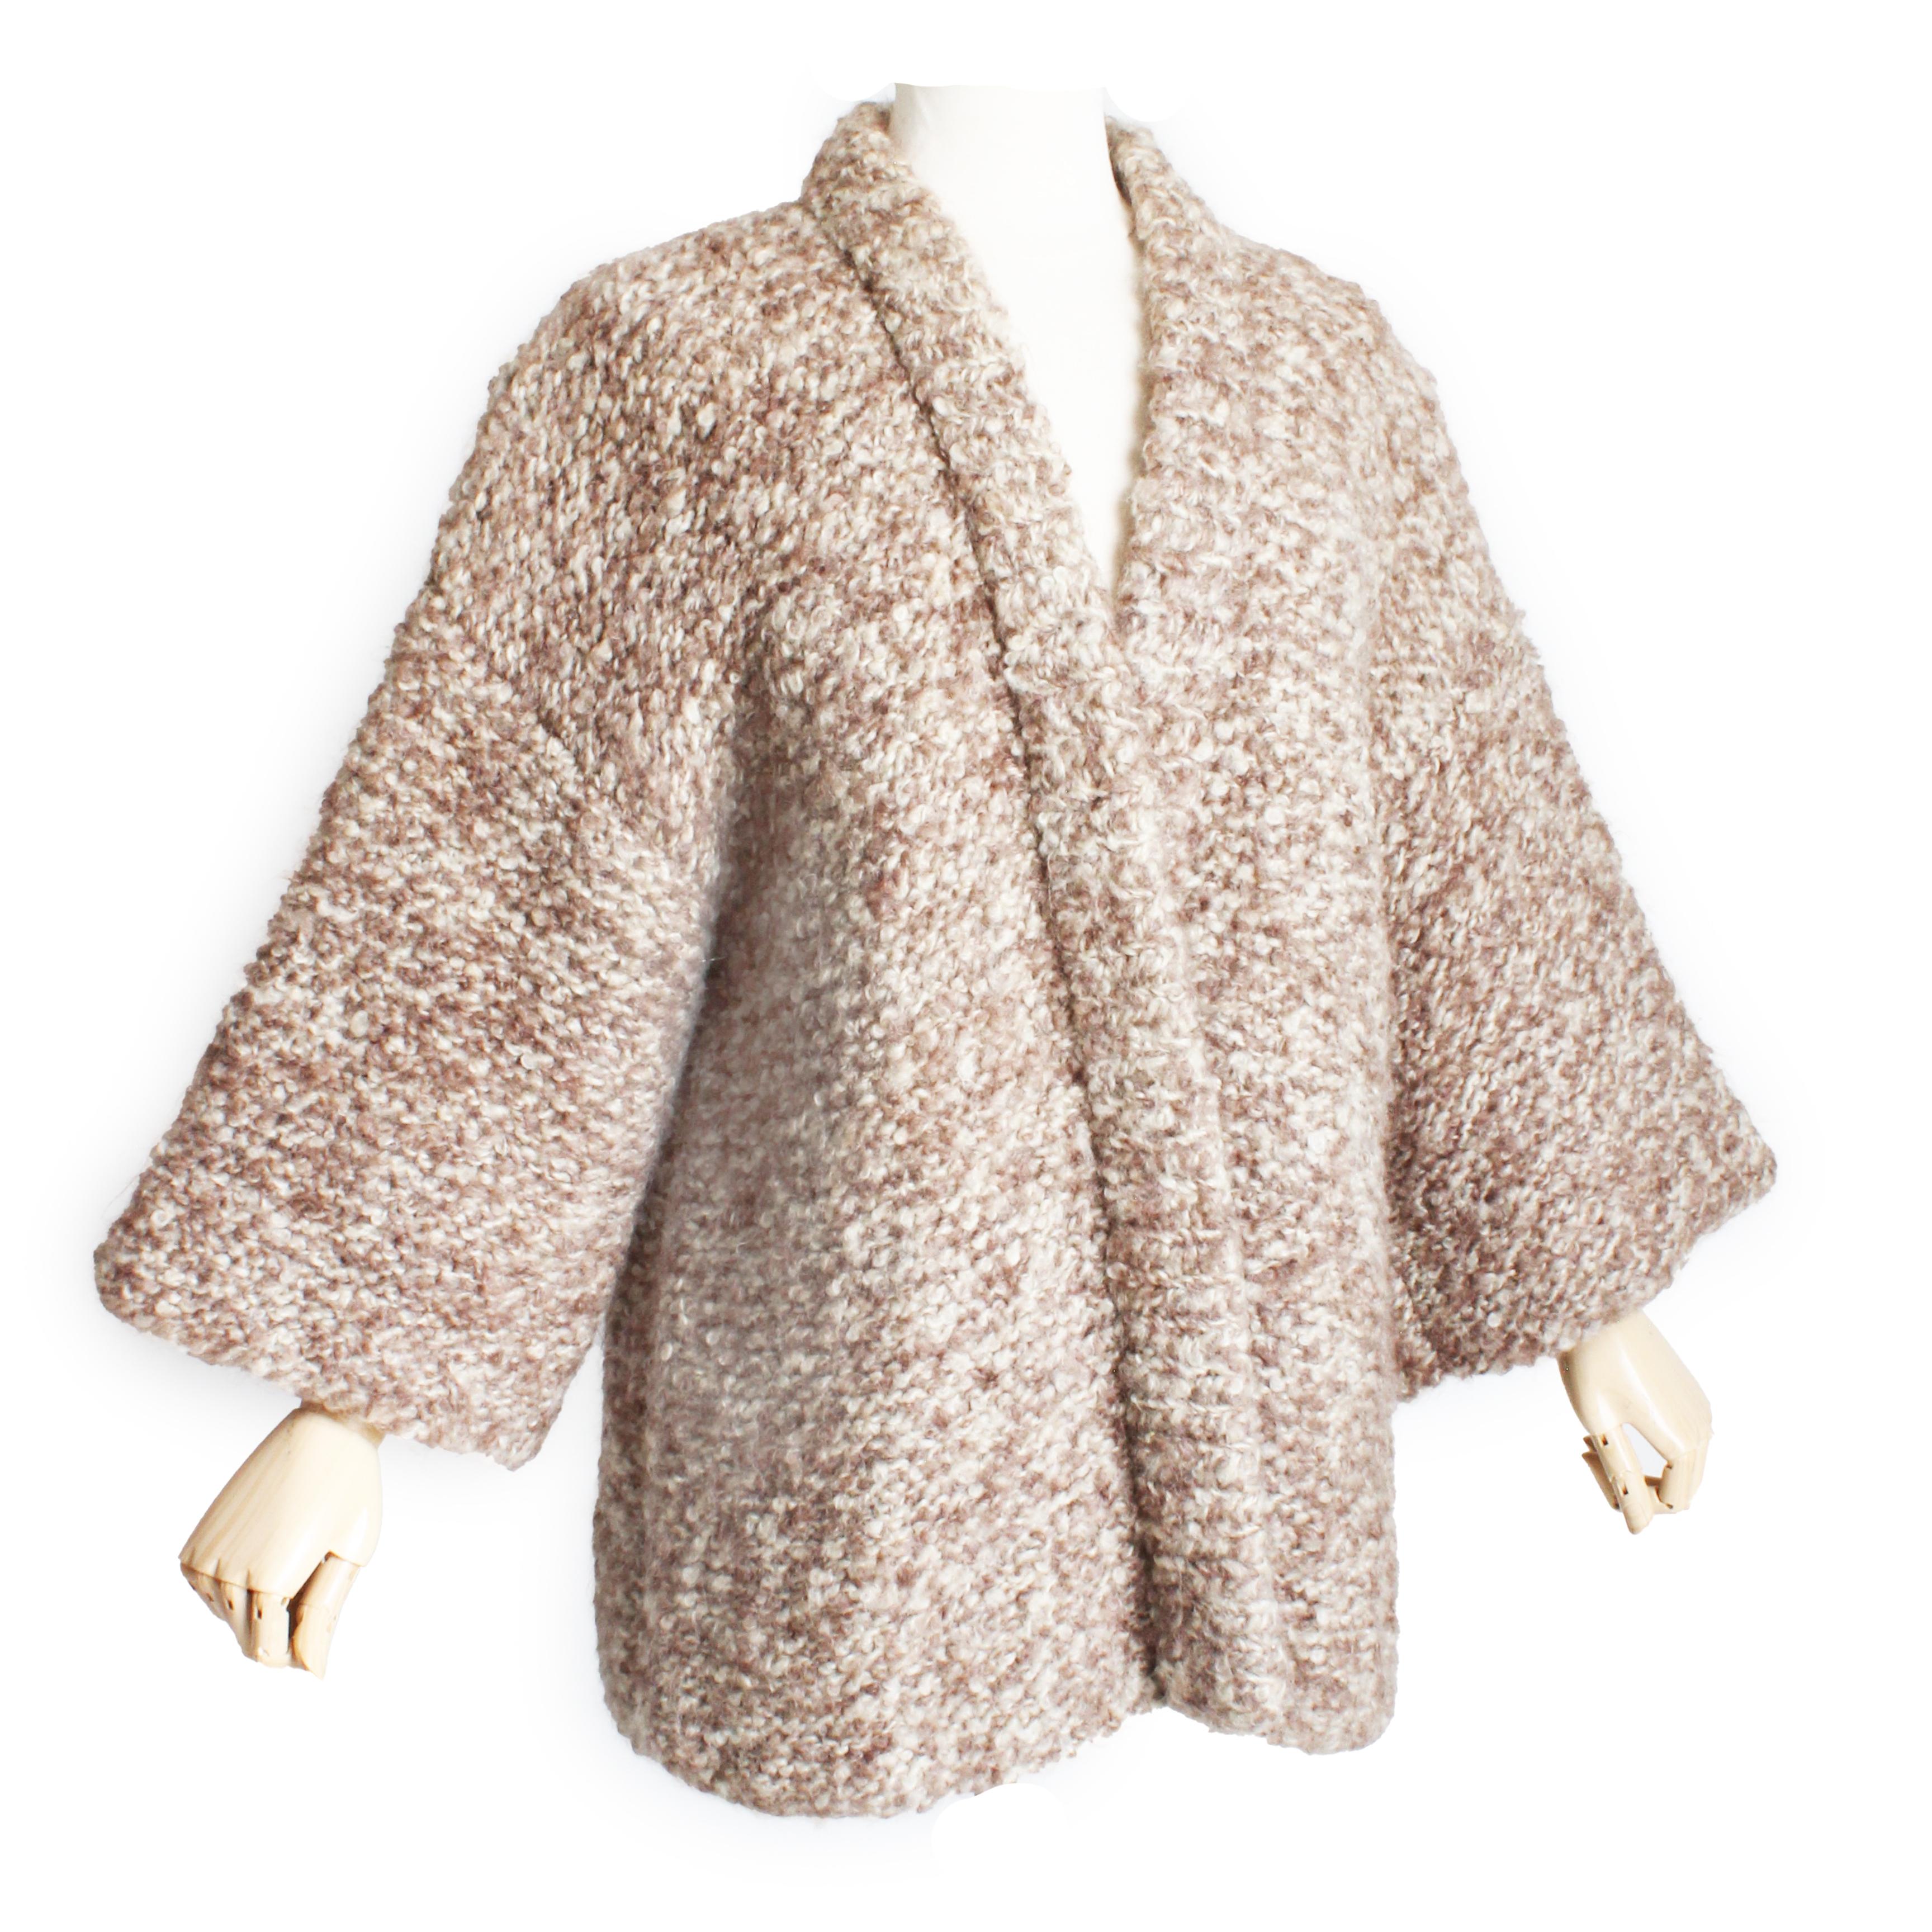 Preowned, vintage Bonnie Cashin 'The Knittery' Noh cardigan jacket, made in 1972.  Crafted from a substantial chunky knit in shades of oatmeal, cream and brown, it features Kimono-style sleeves and open construction, making it perfect for layering